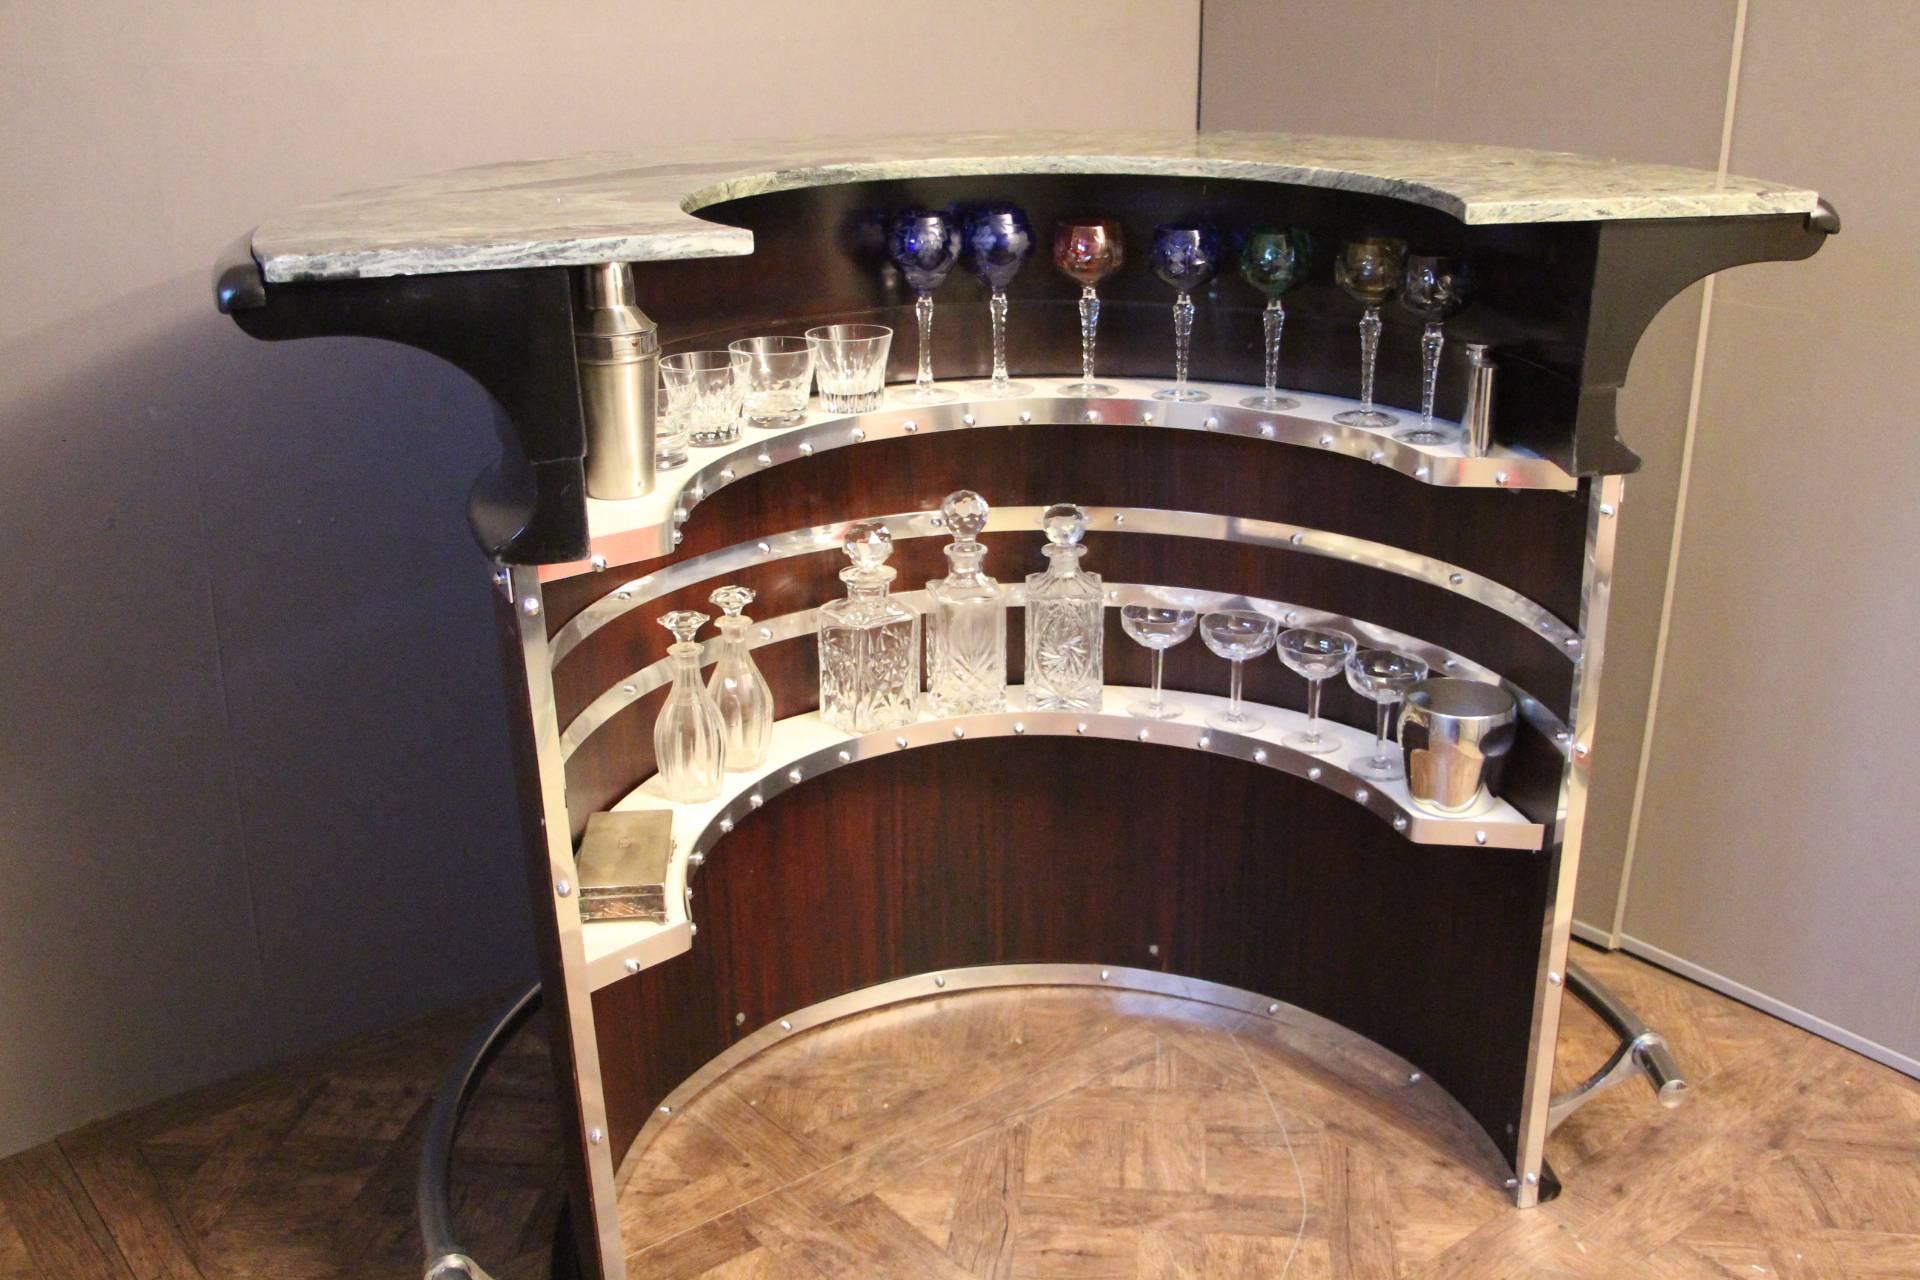 This magnificent bar is very comfortable with its half moon shape, its green marble top and its shelves inside.
It features red walnut, blackened wood and chrome fittings.